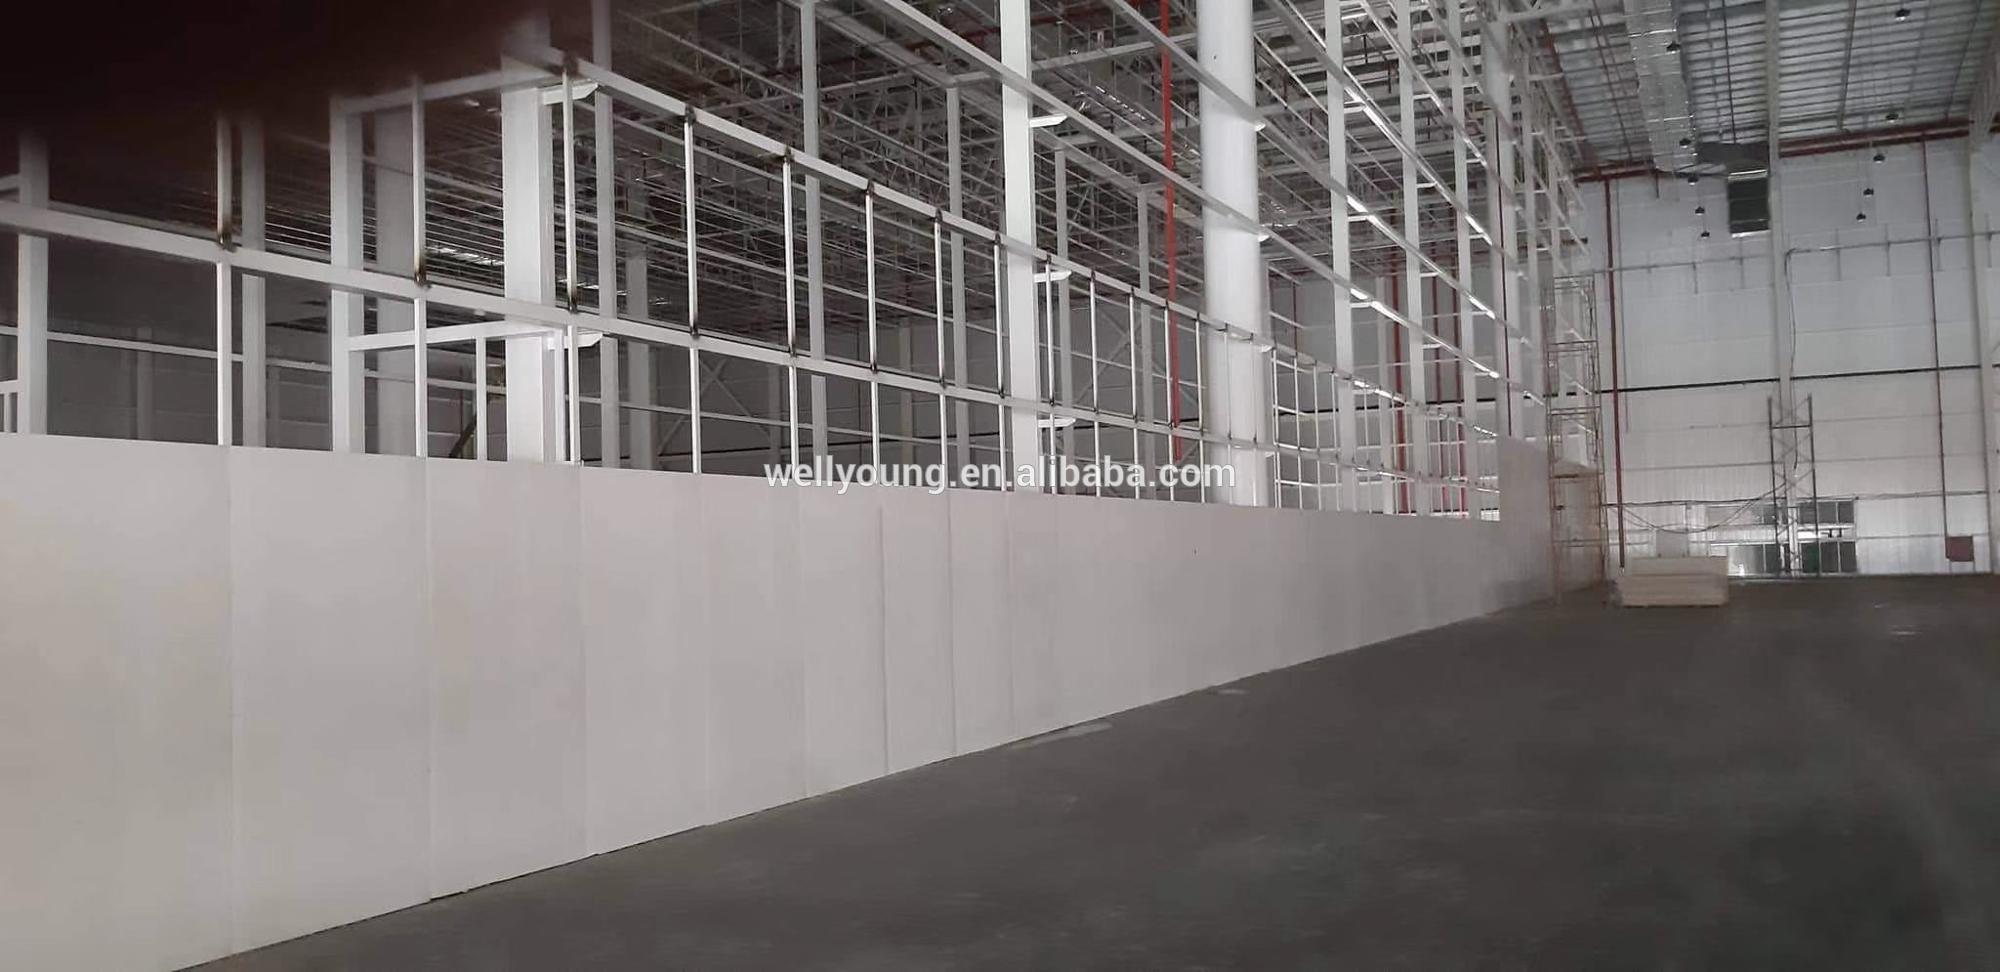 wellyoung white magesnium cement board / grey mgo panel price